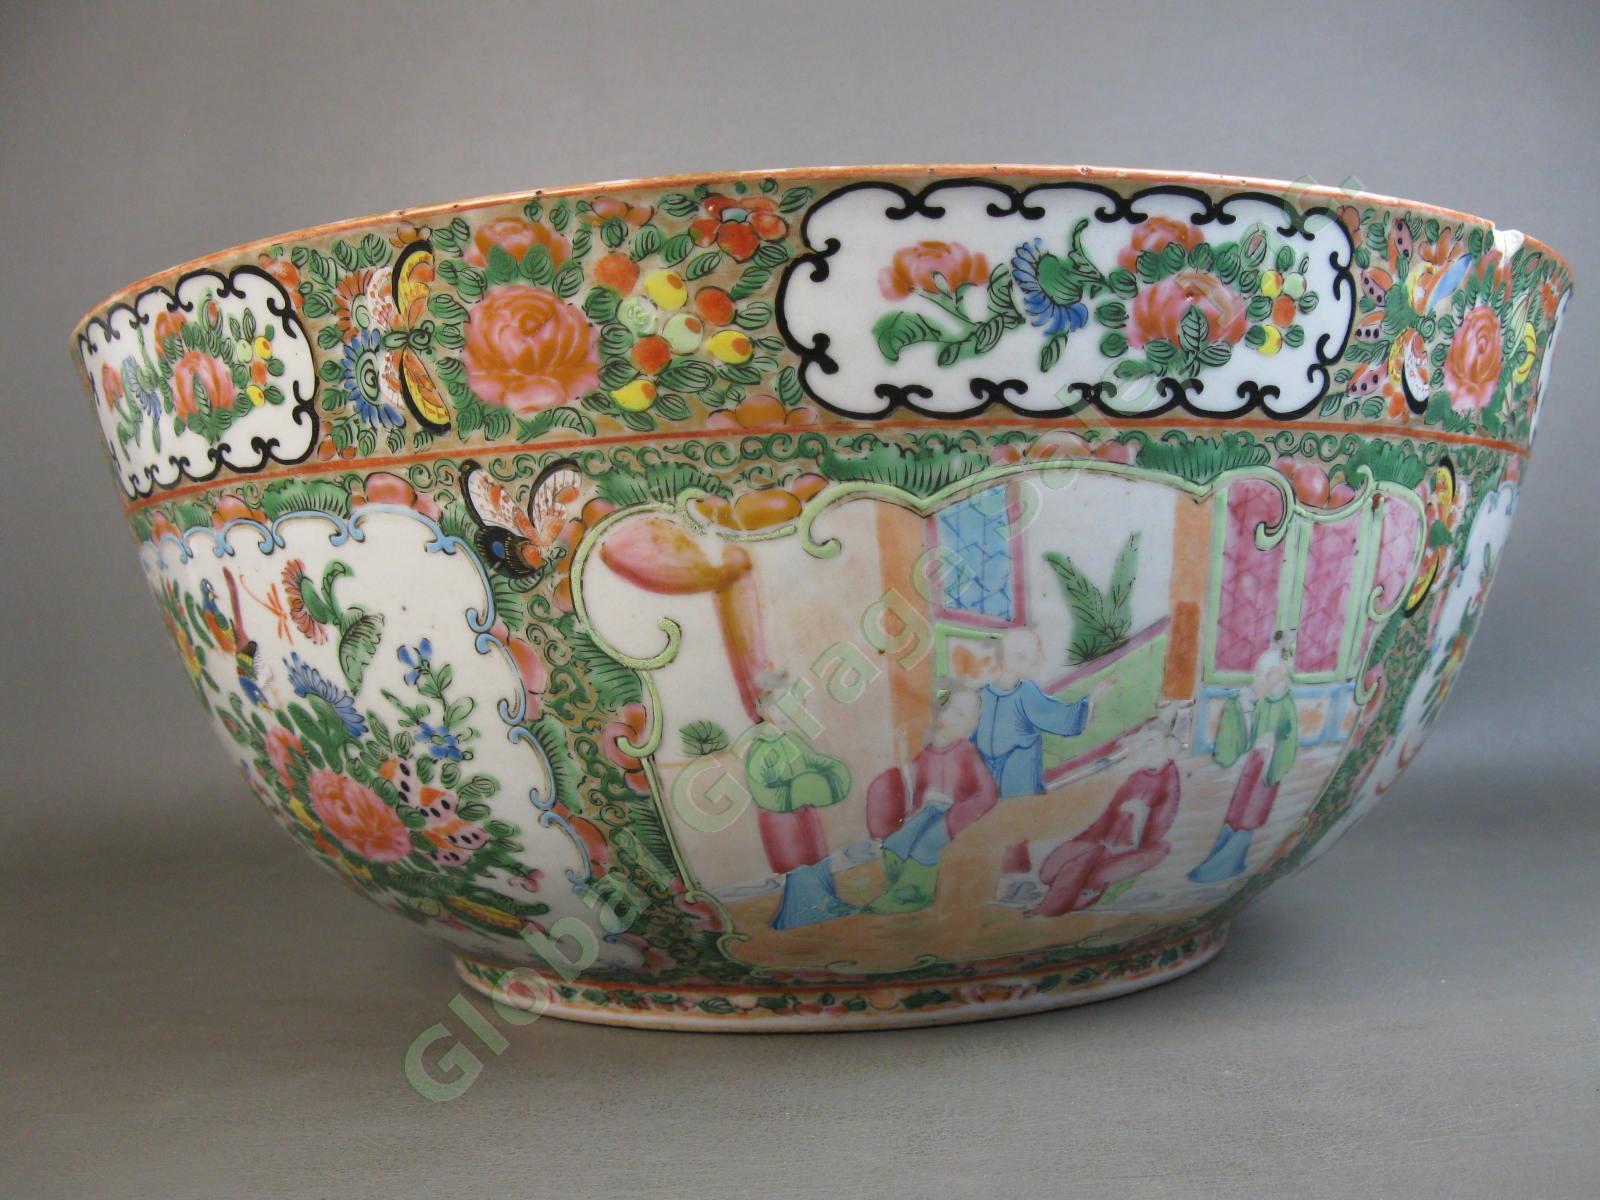 RARE Antique Chinese Early 19th C Large Famille Rose Medallion Punch Bowl 15" NR 4